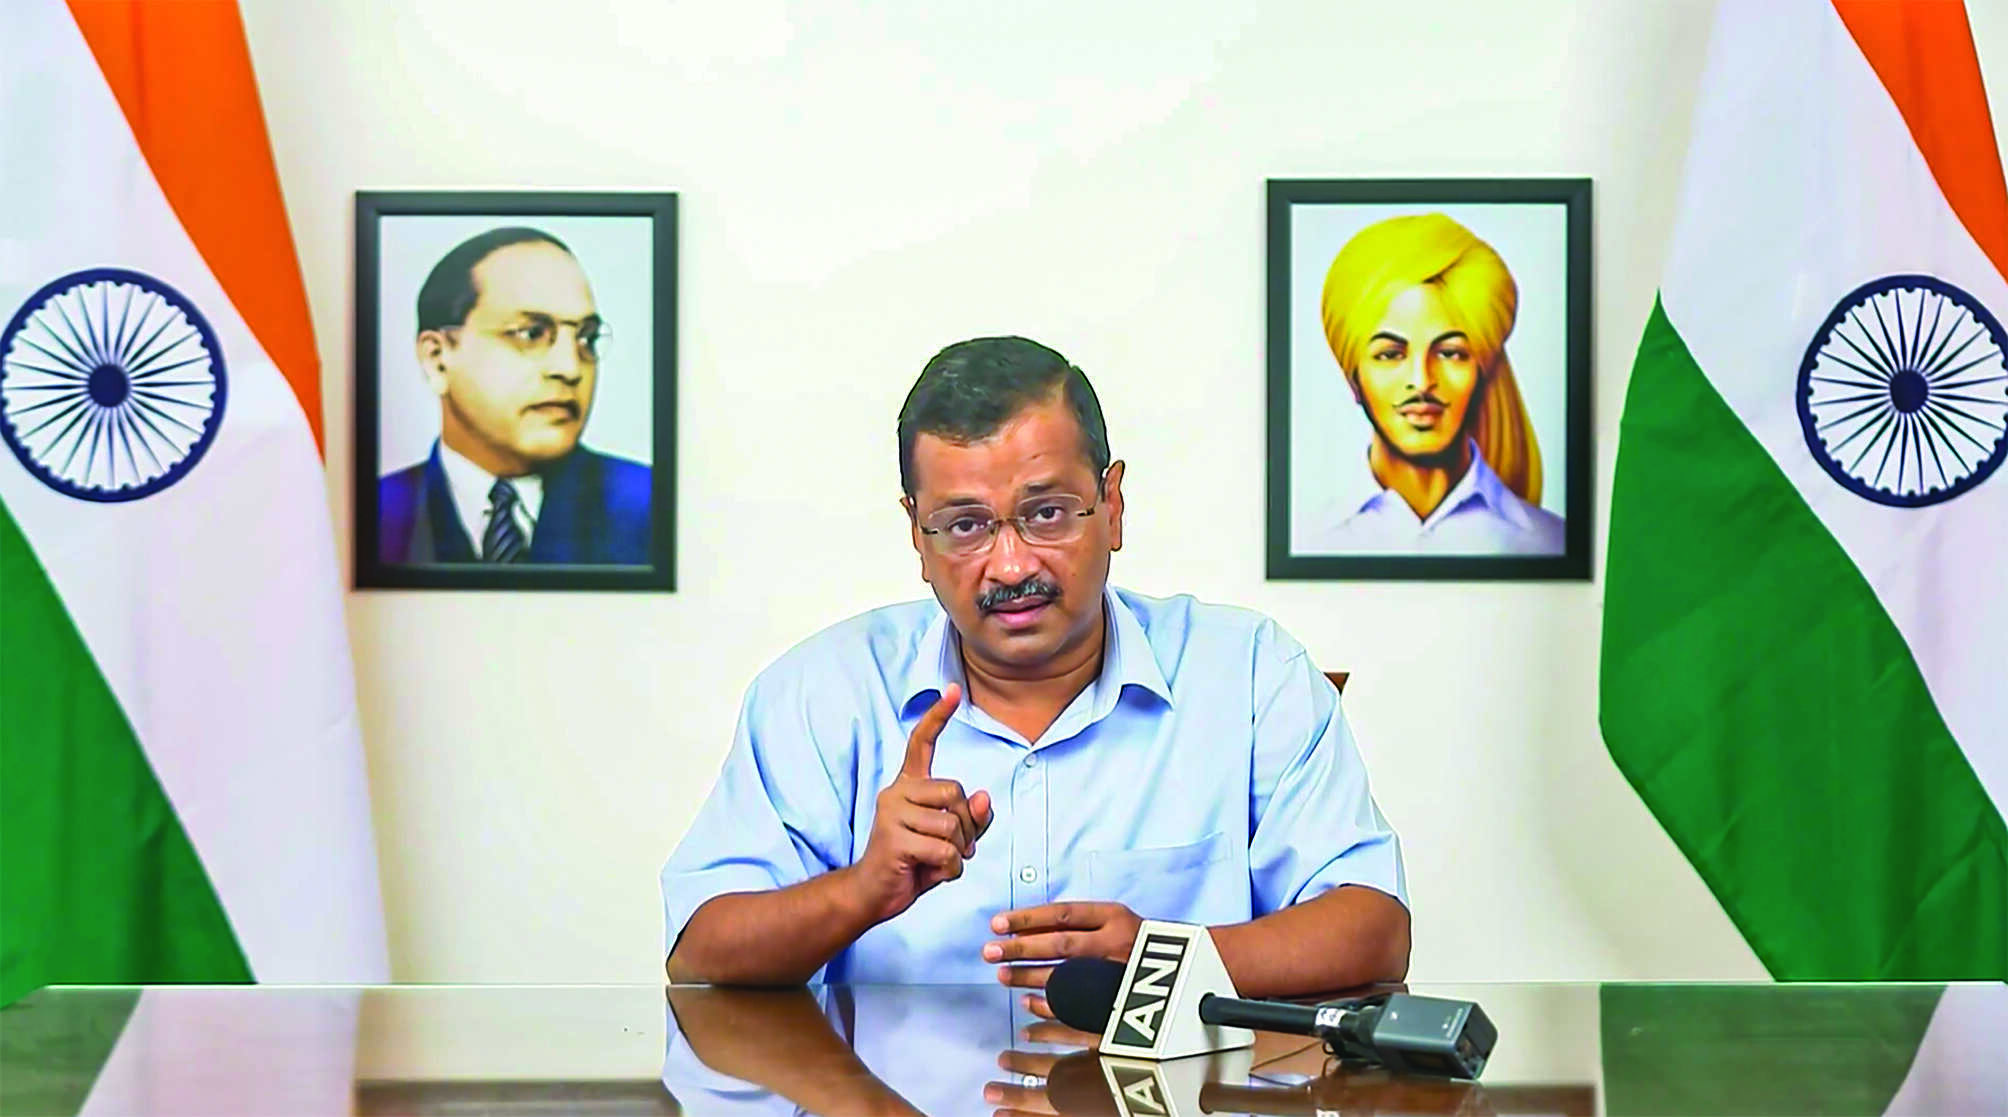 Kejriwal demands proper security for Kashmiri Pandits in the Valley